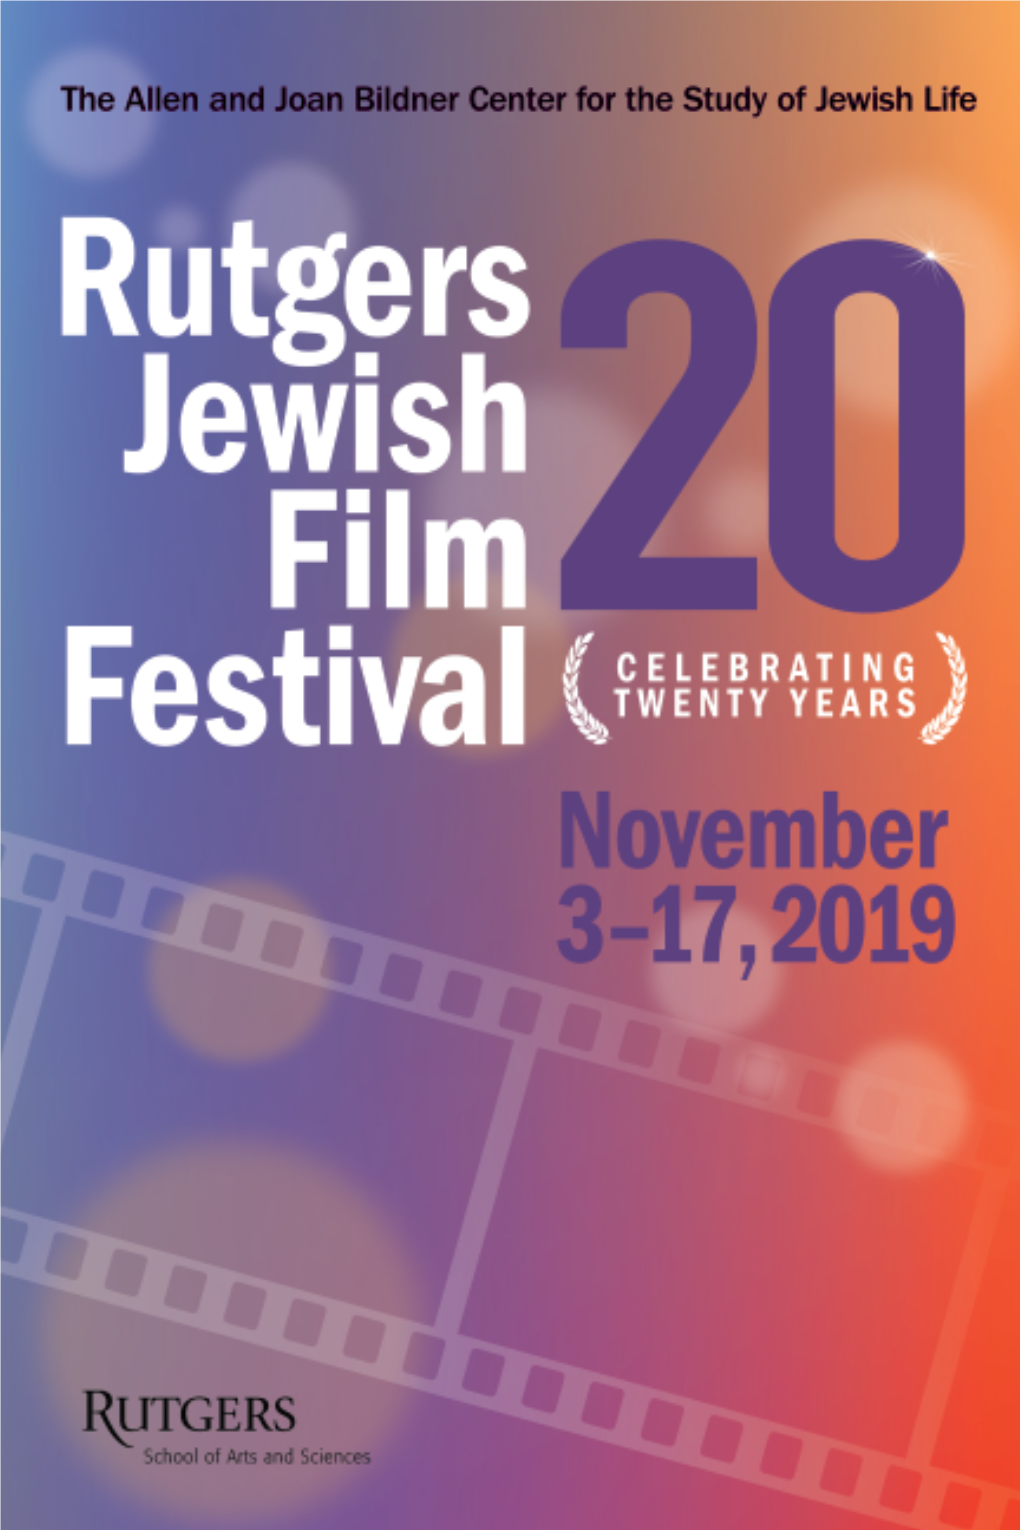 20Th Film Festival Celebrating Twenty Years of Jewish History, Culture, and Identity, with Eighteen Films Screening in Three Venues Across New Jersey